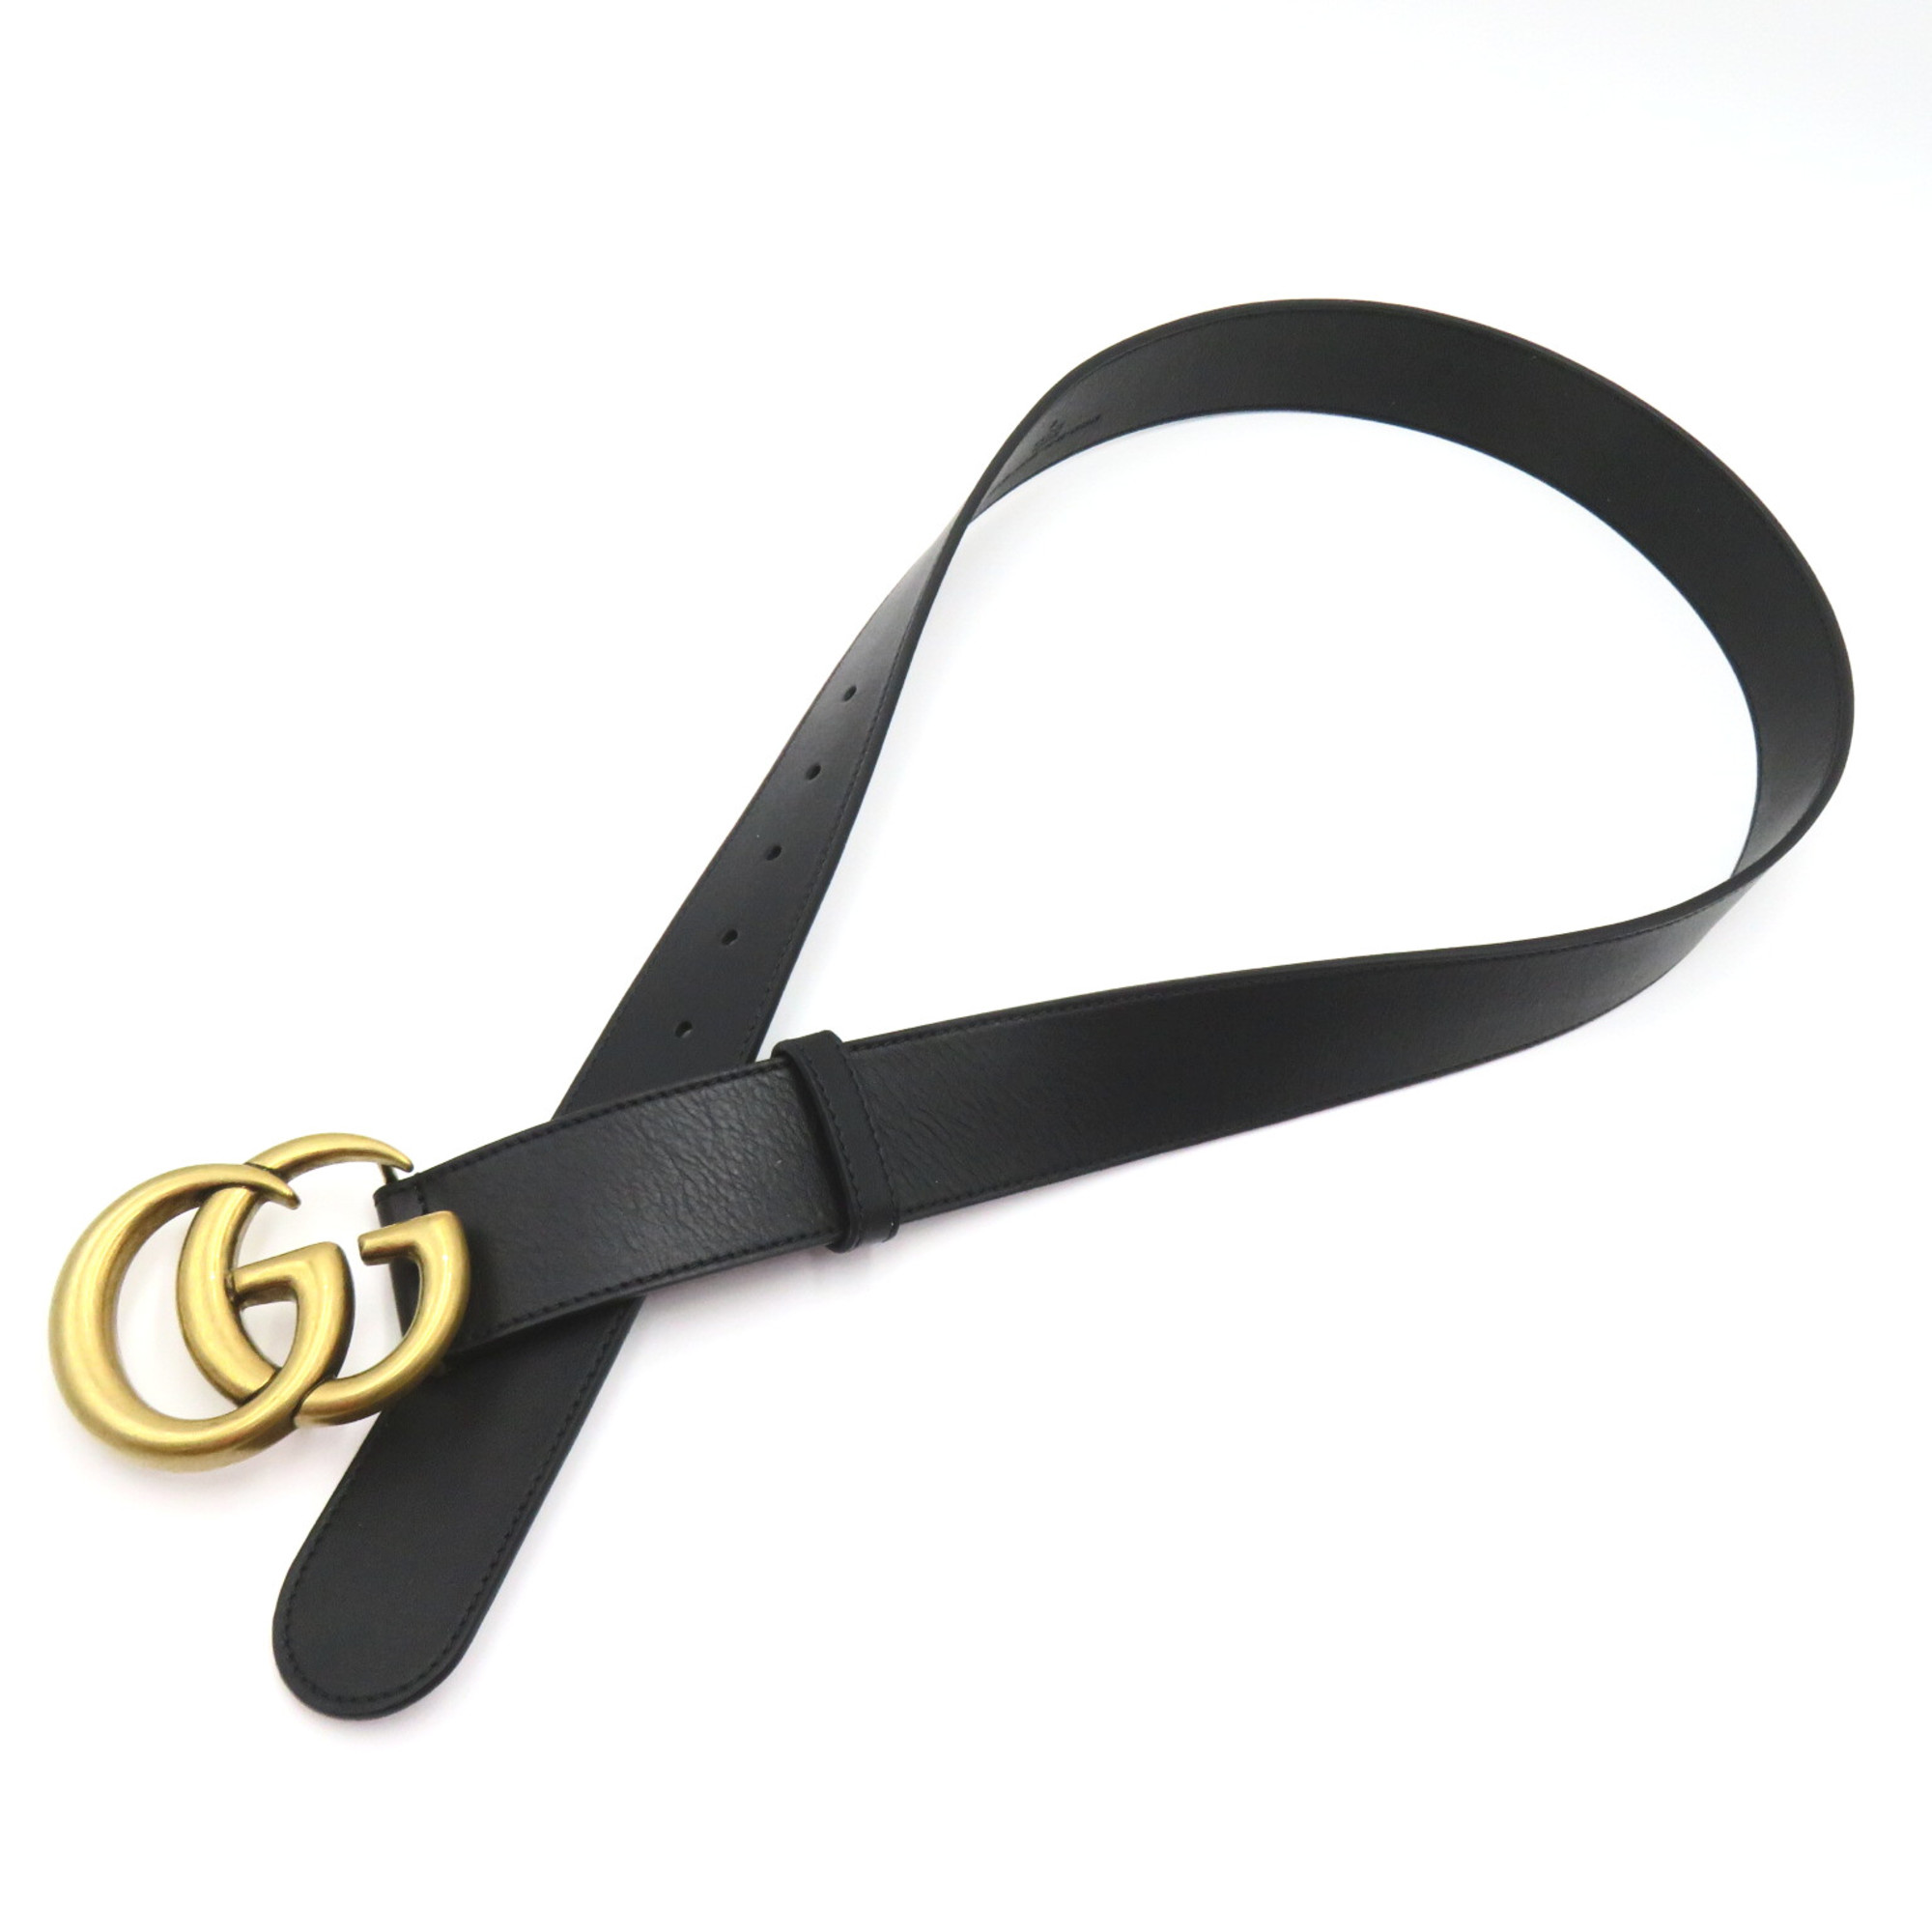 GUCCI GG Marmont leather belt Black leather 397660AAA5Z100095